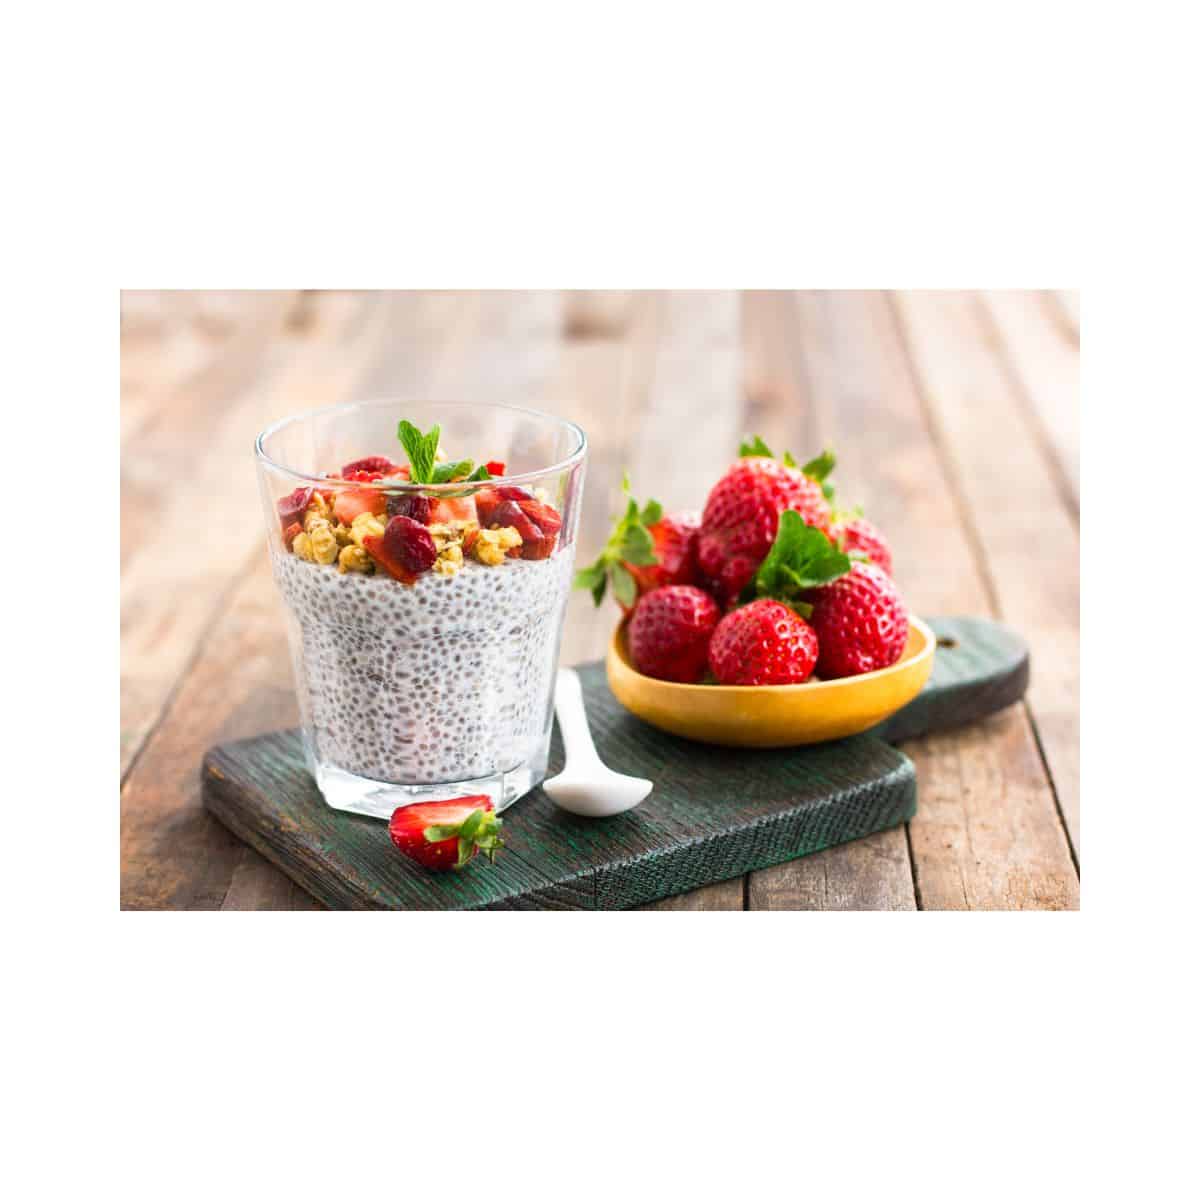 a bright photo of a clear glass with chia seeds hydrated in milk with various fruits on top of the chia pudding. next to the cup is a white spoon and a yellow dish with a pile of strawberries on it. all of this is on a rustic green board atop a wooden table